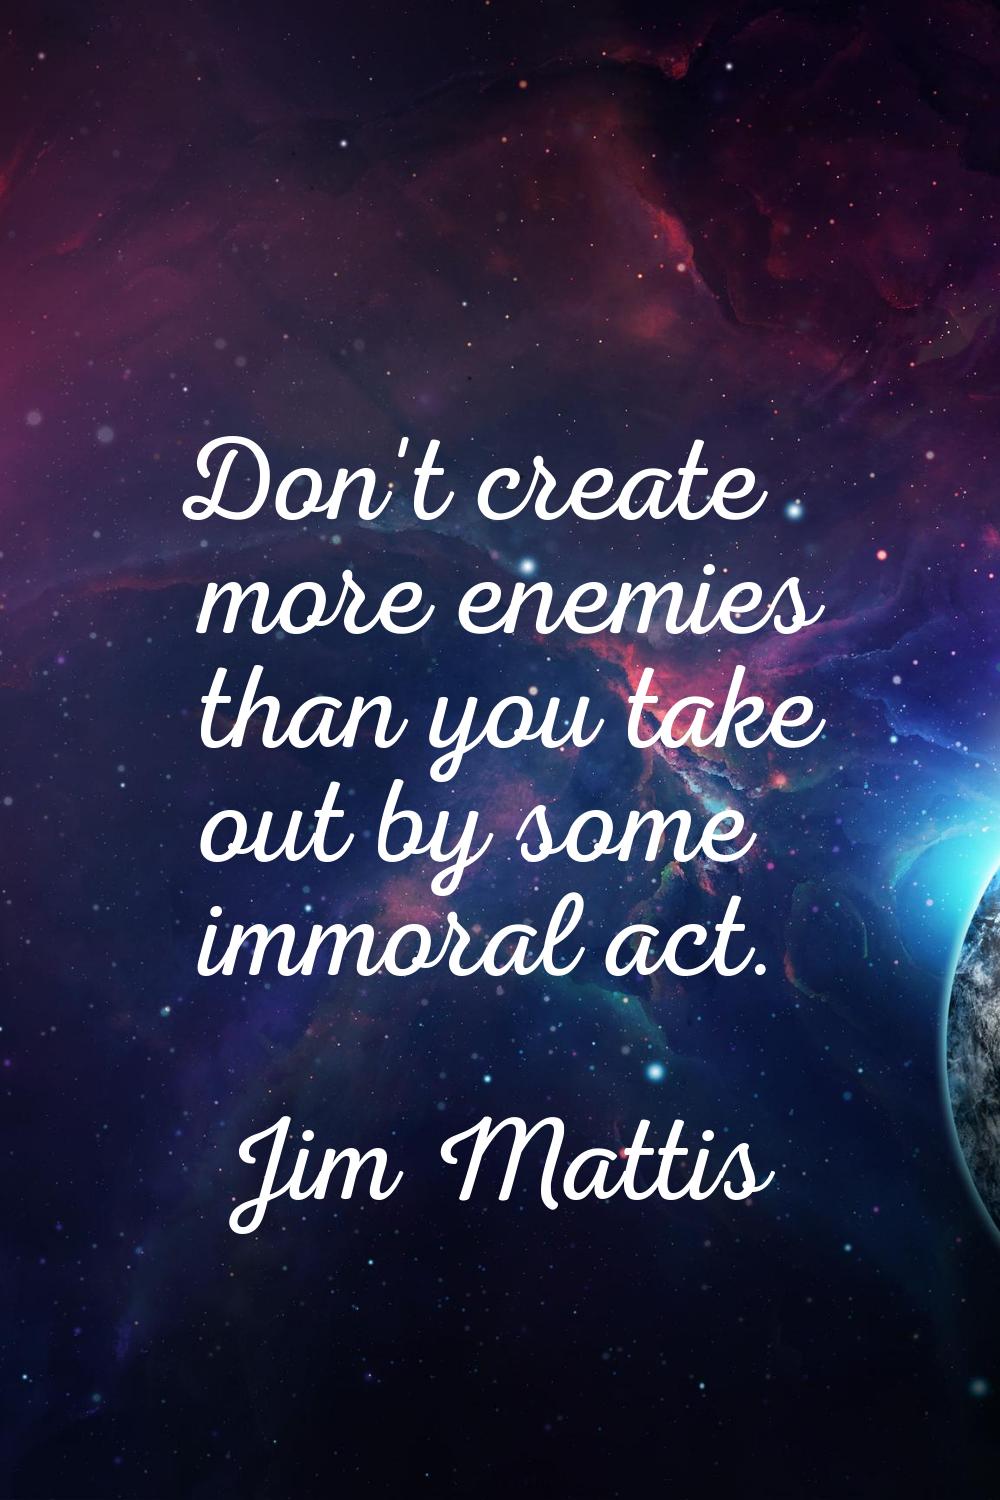 Don't create more enemies than you take out by some immoral act.